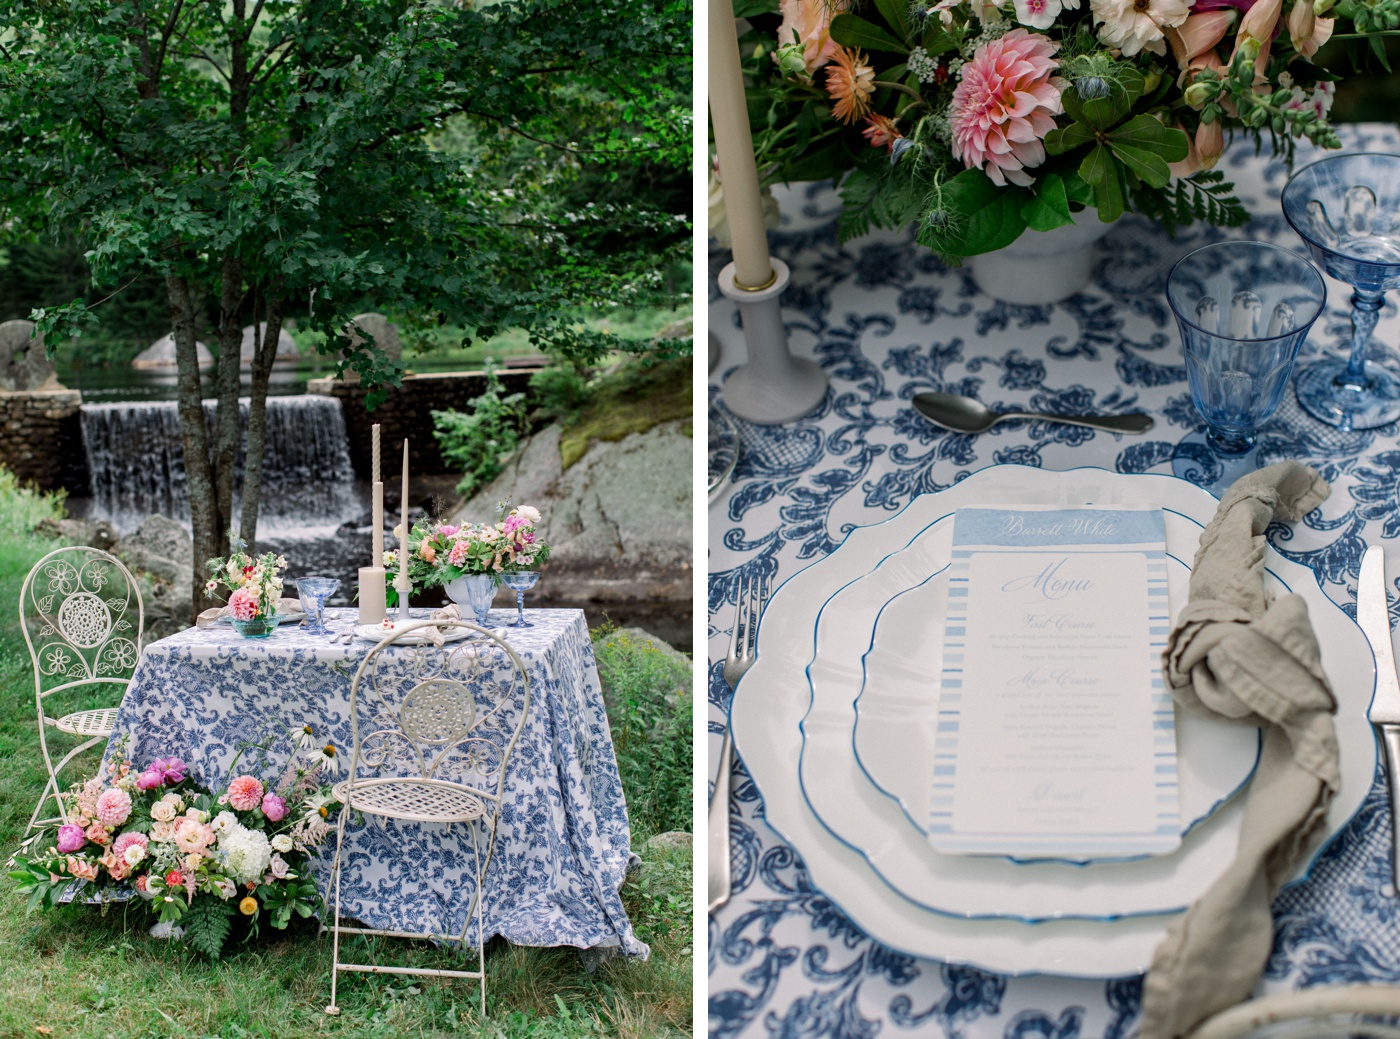 Styled shoot with blue and white details